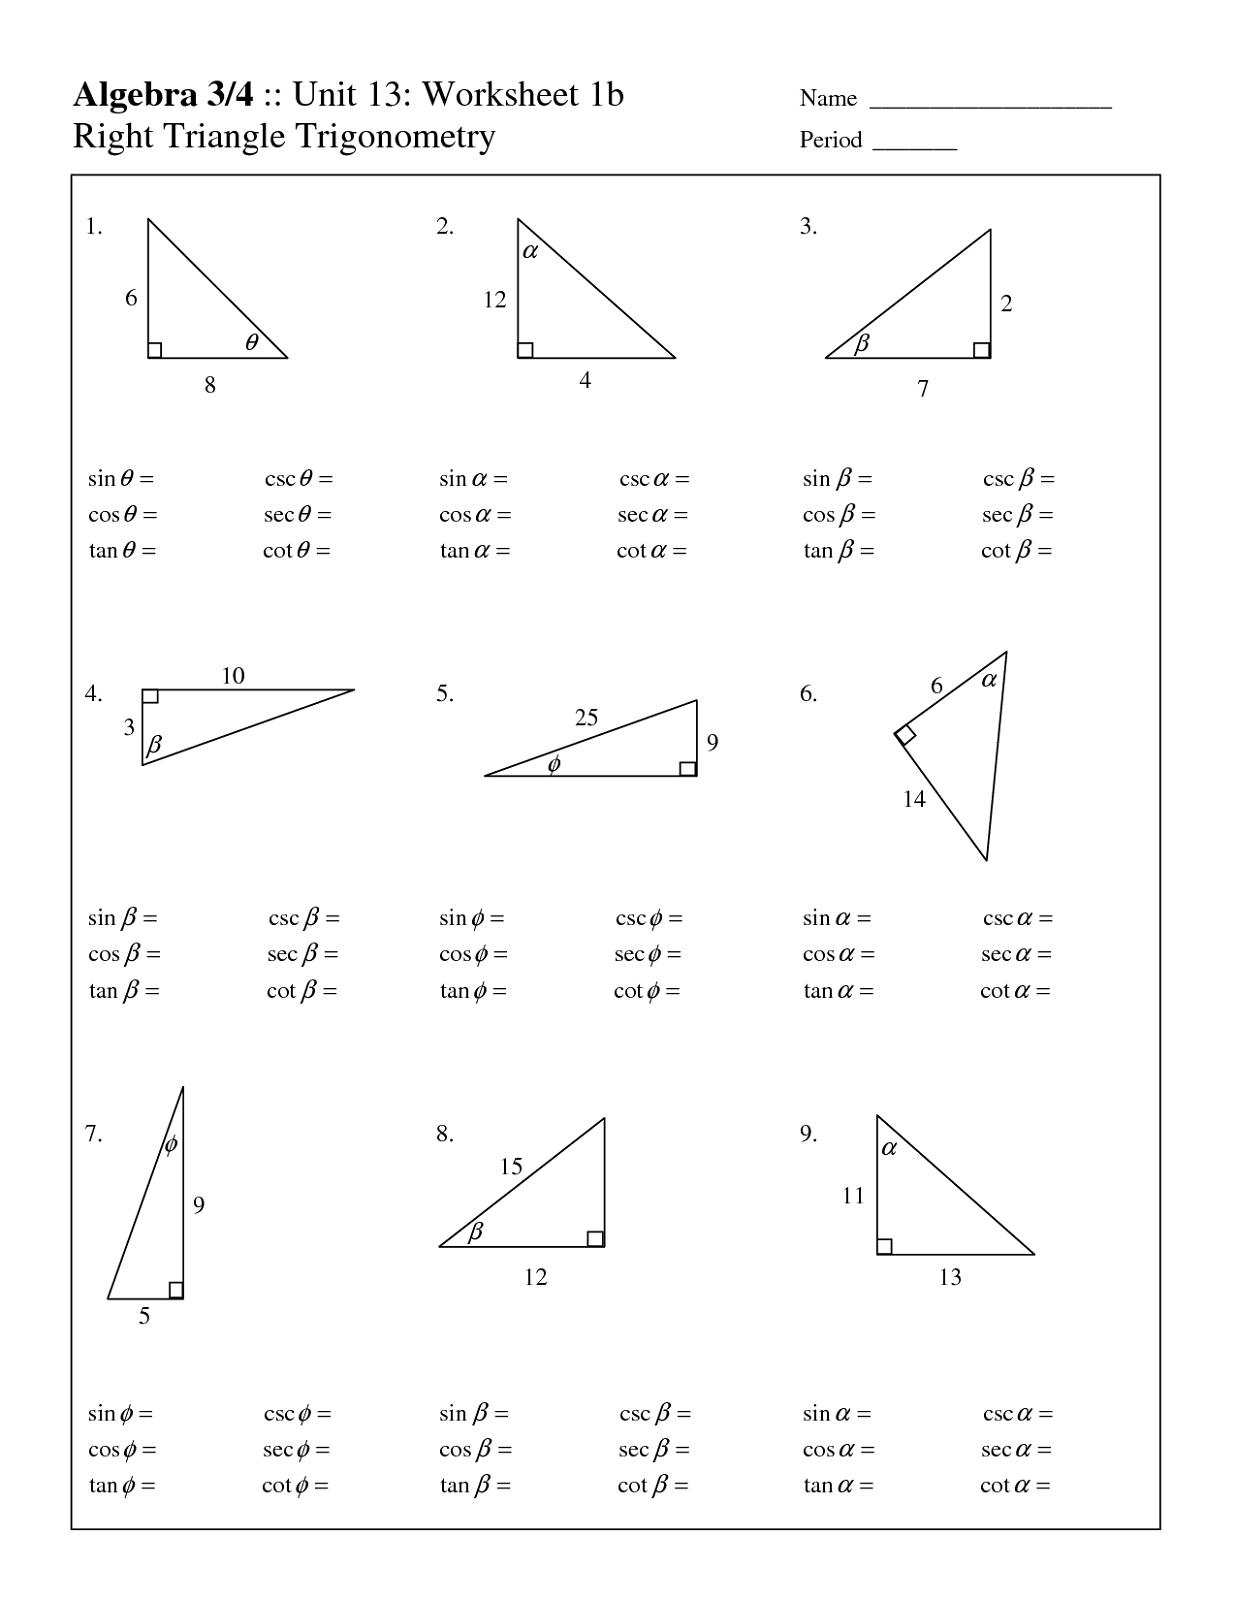 Free Fact Triangles Worksheets | Activity Shelter